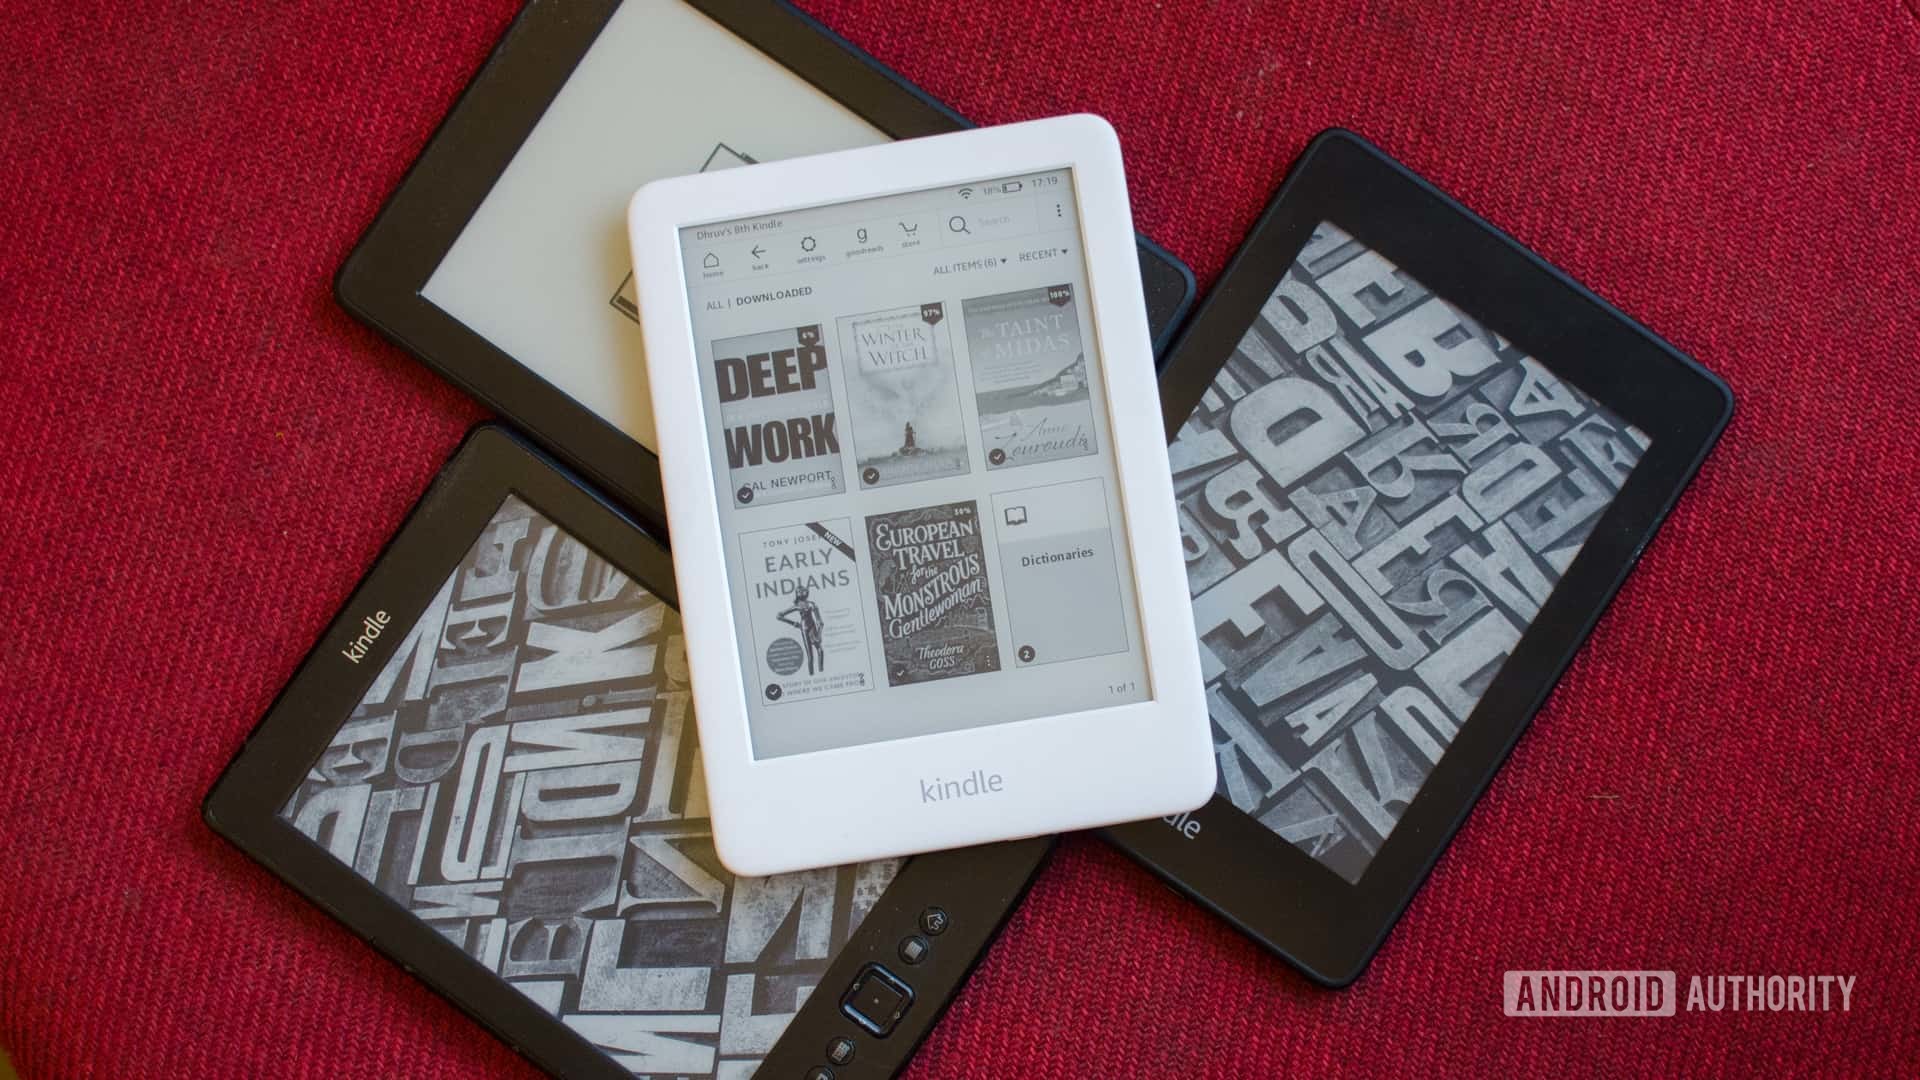 Amazon Kindle 2019 placed on top of older kindles